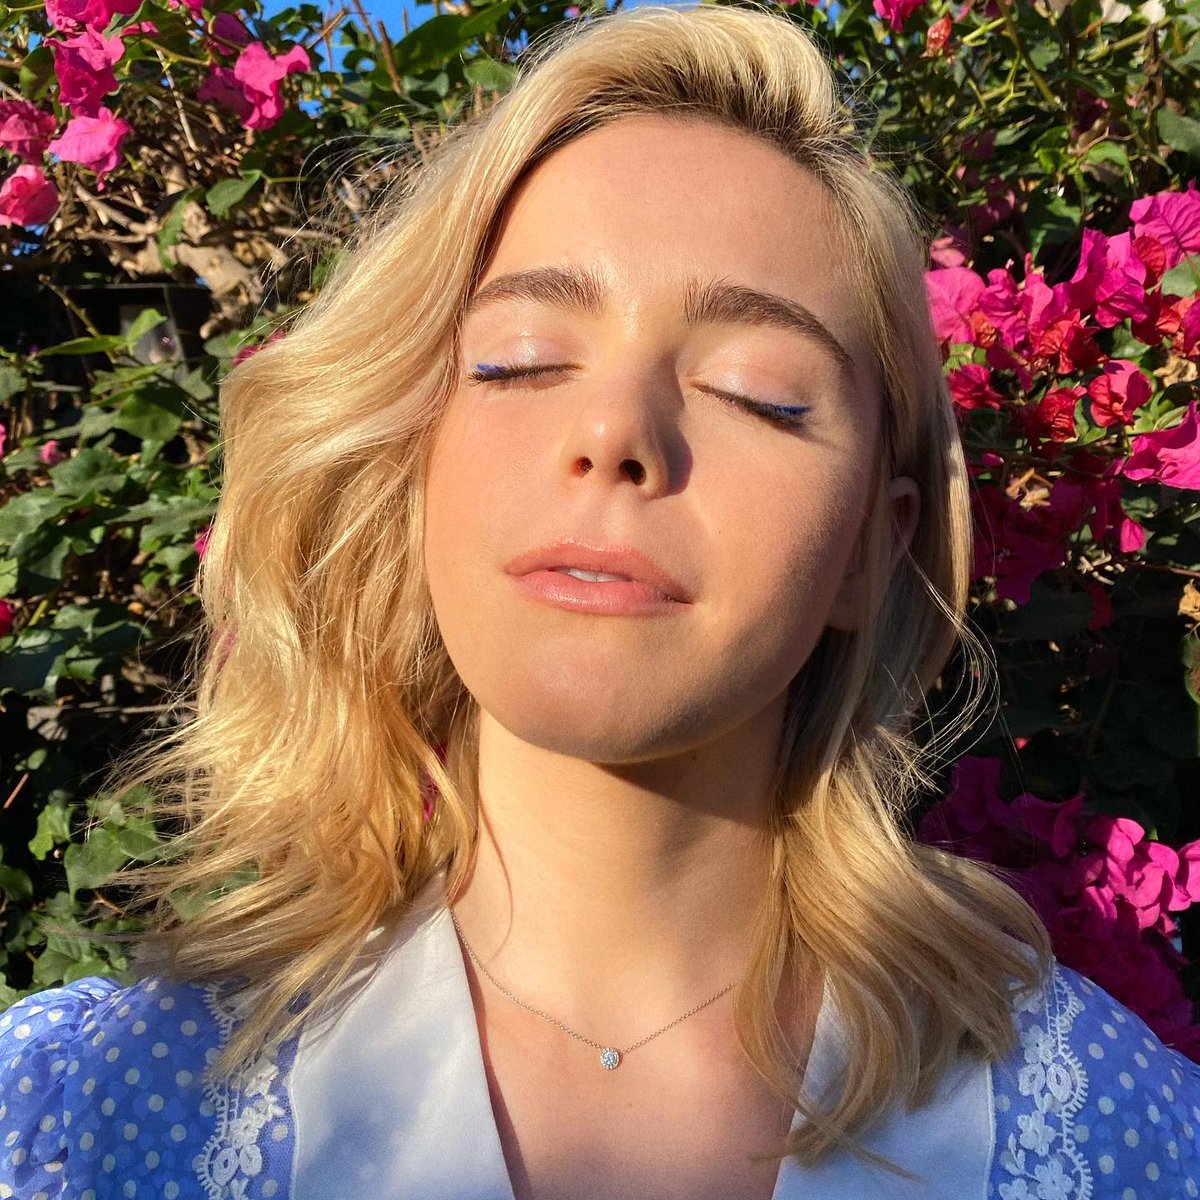 This Is The Face Of Pleasure Kiernan Shipka Is Going To Have Each Time I Cum Deep In Her Pussy